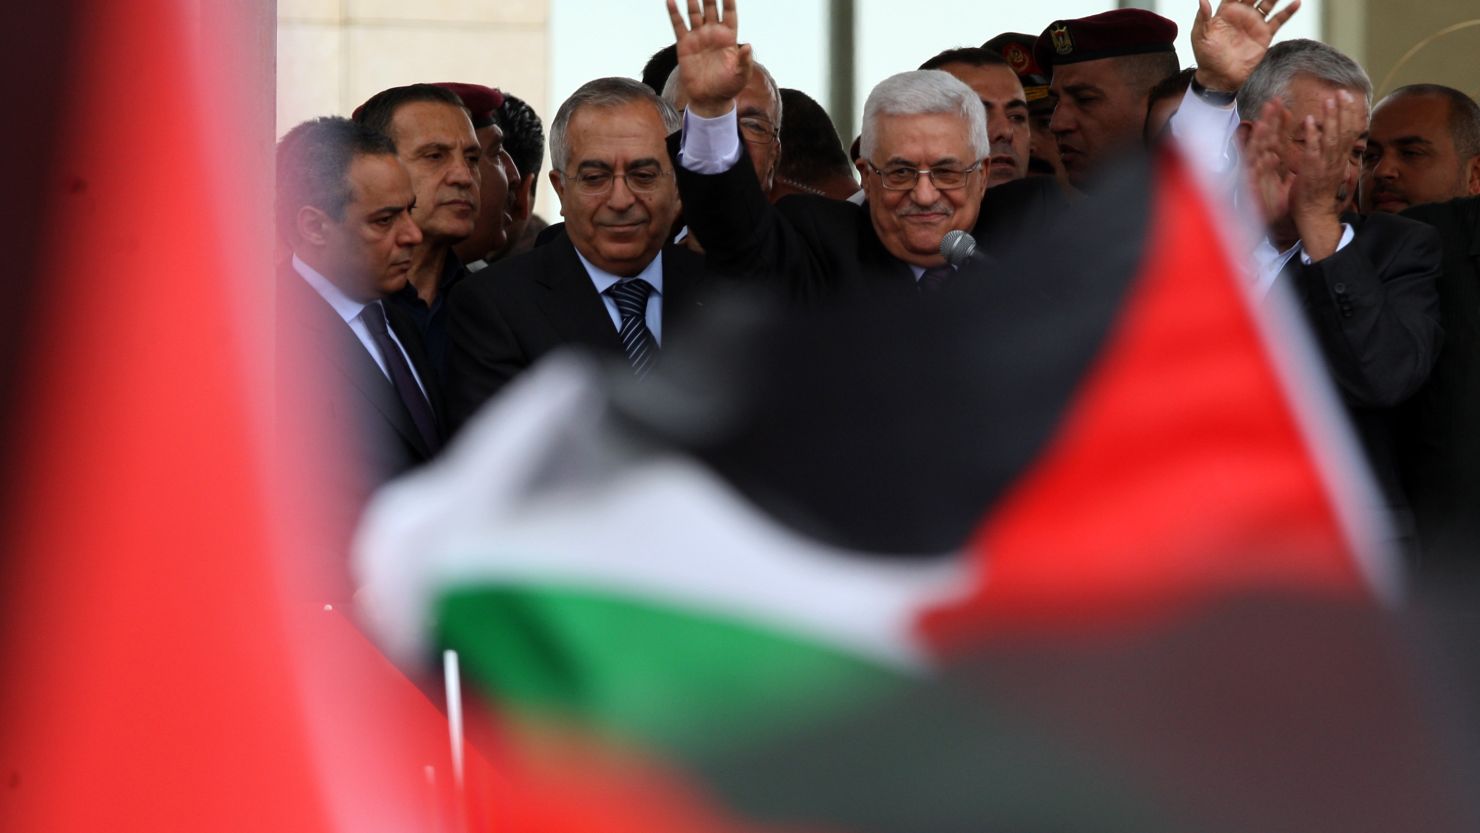 Palestinian President Mahmoud Abbas waves to Palestinians as they welcome him at his Ramallah headquarters Sunday.